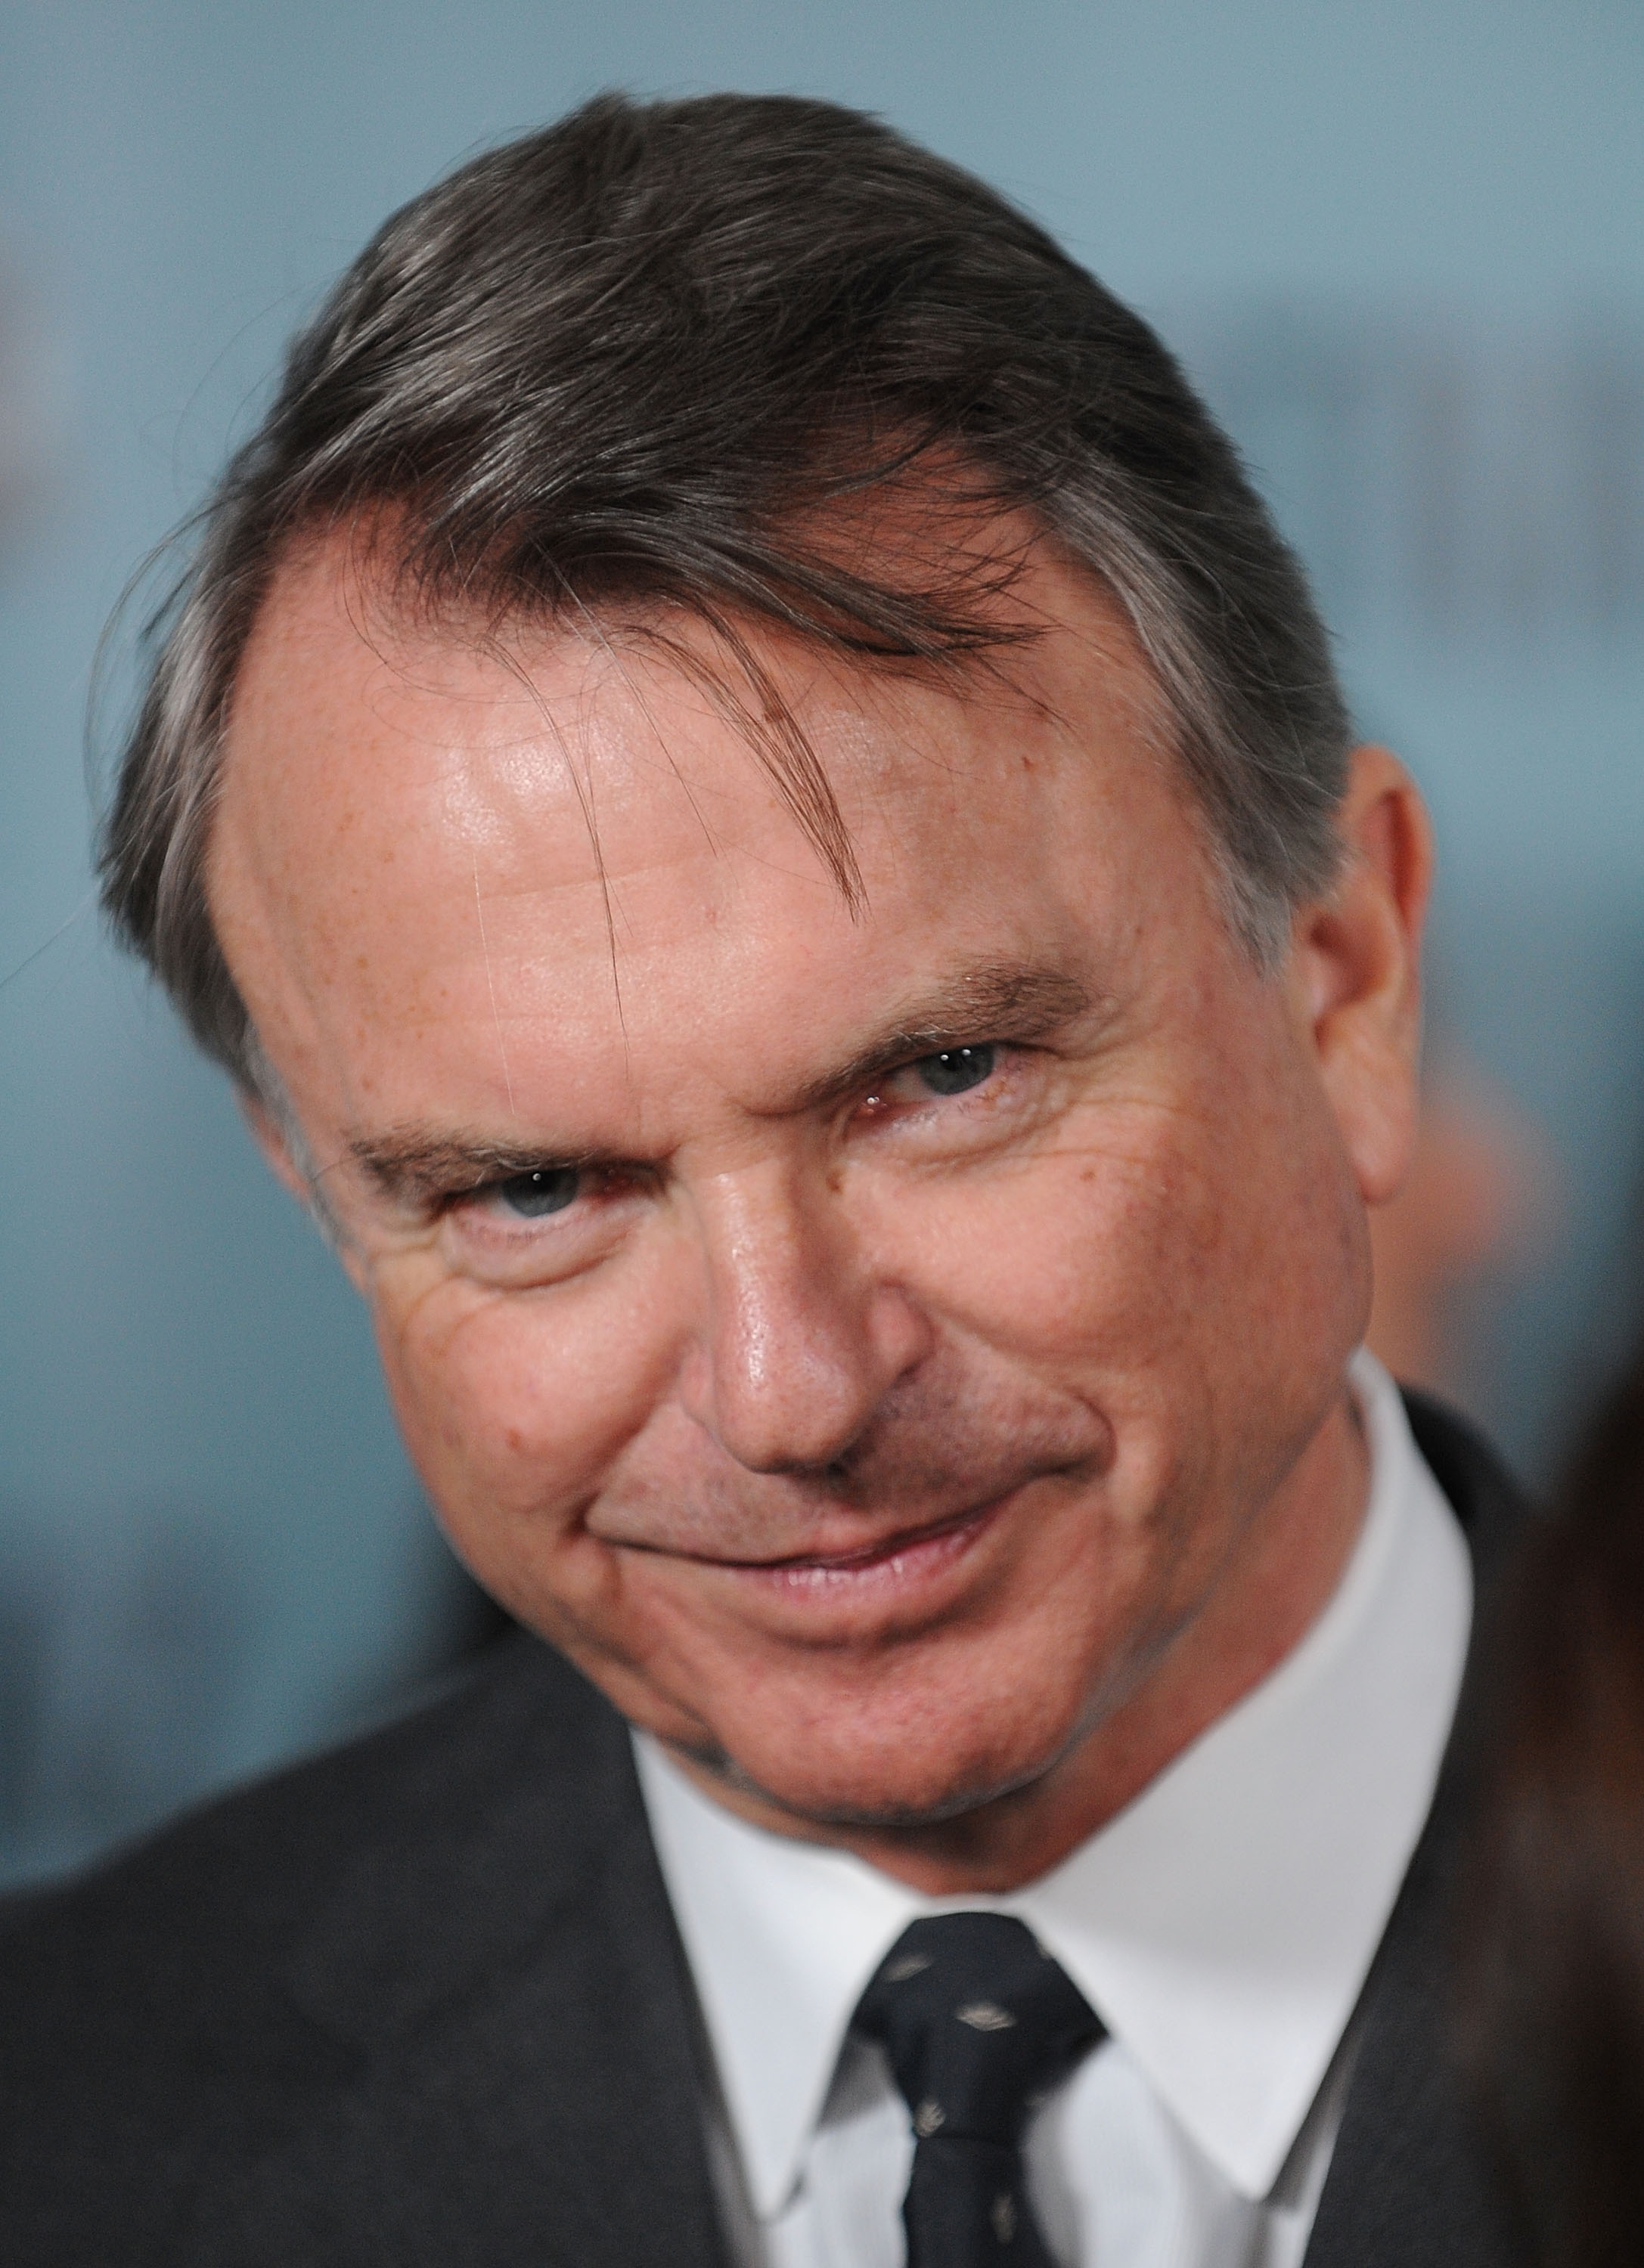 Actor Sam Neill arrives at the premiere party for FOX's new series "Alcatraz" at Alcatraz Island on January 11, 2012 in San Francisco, California. | Source: Getty Images